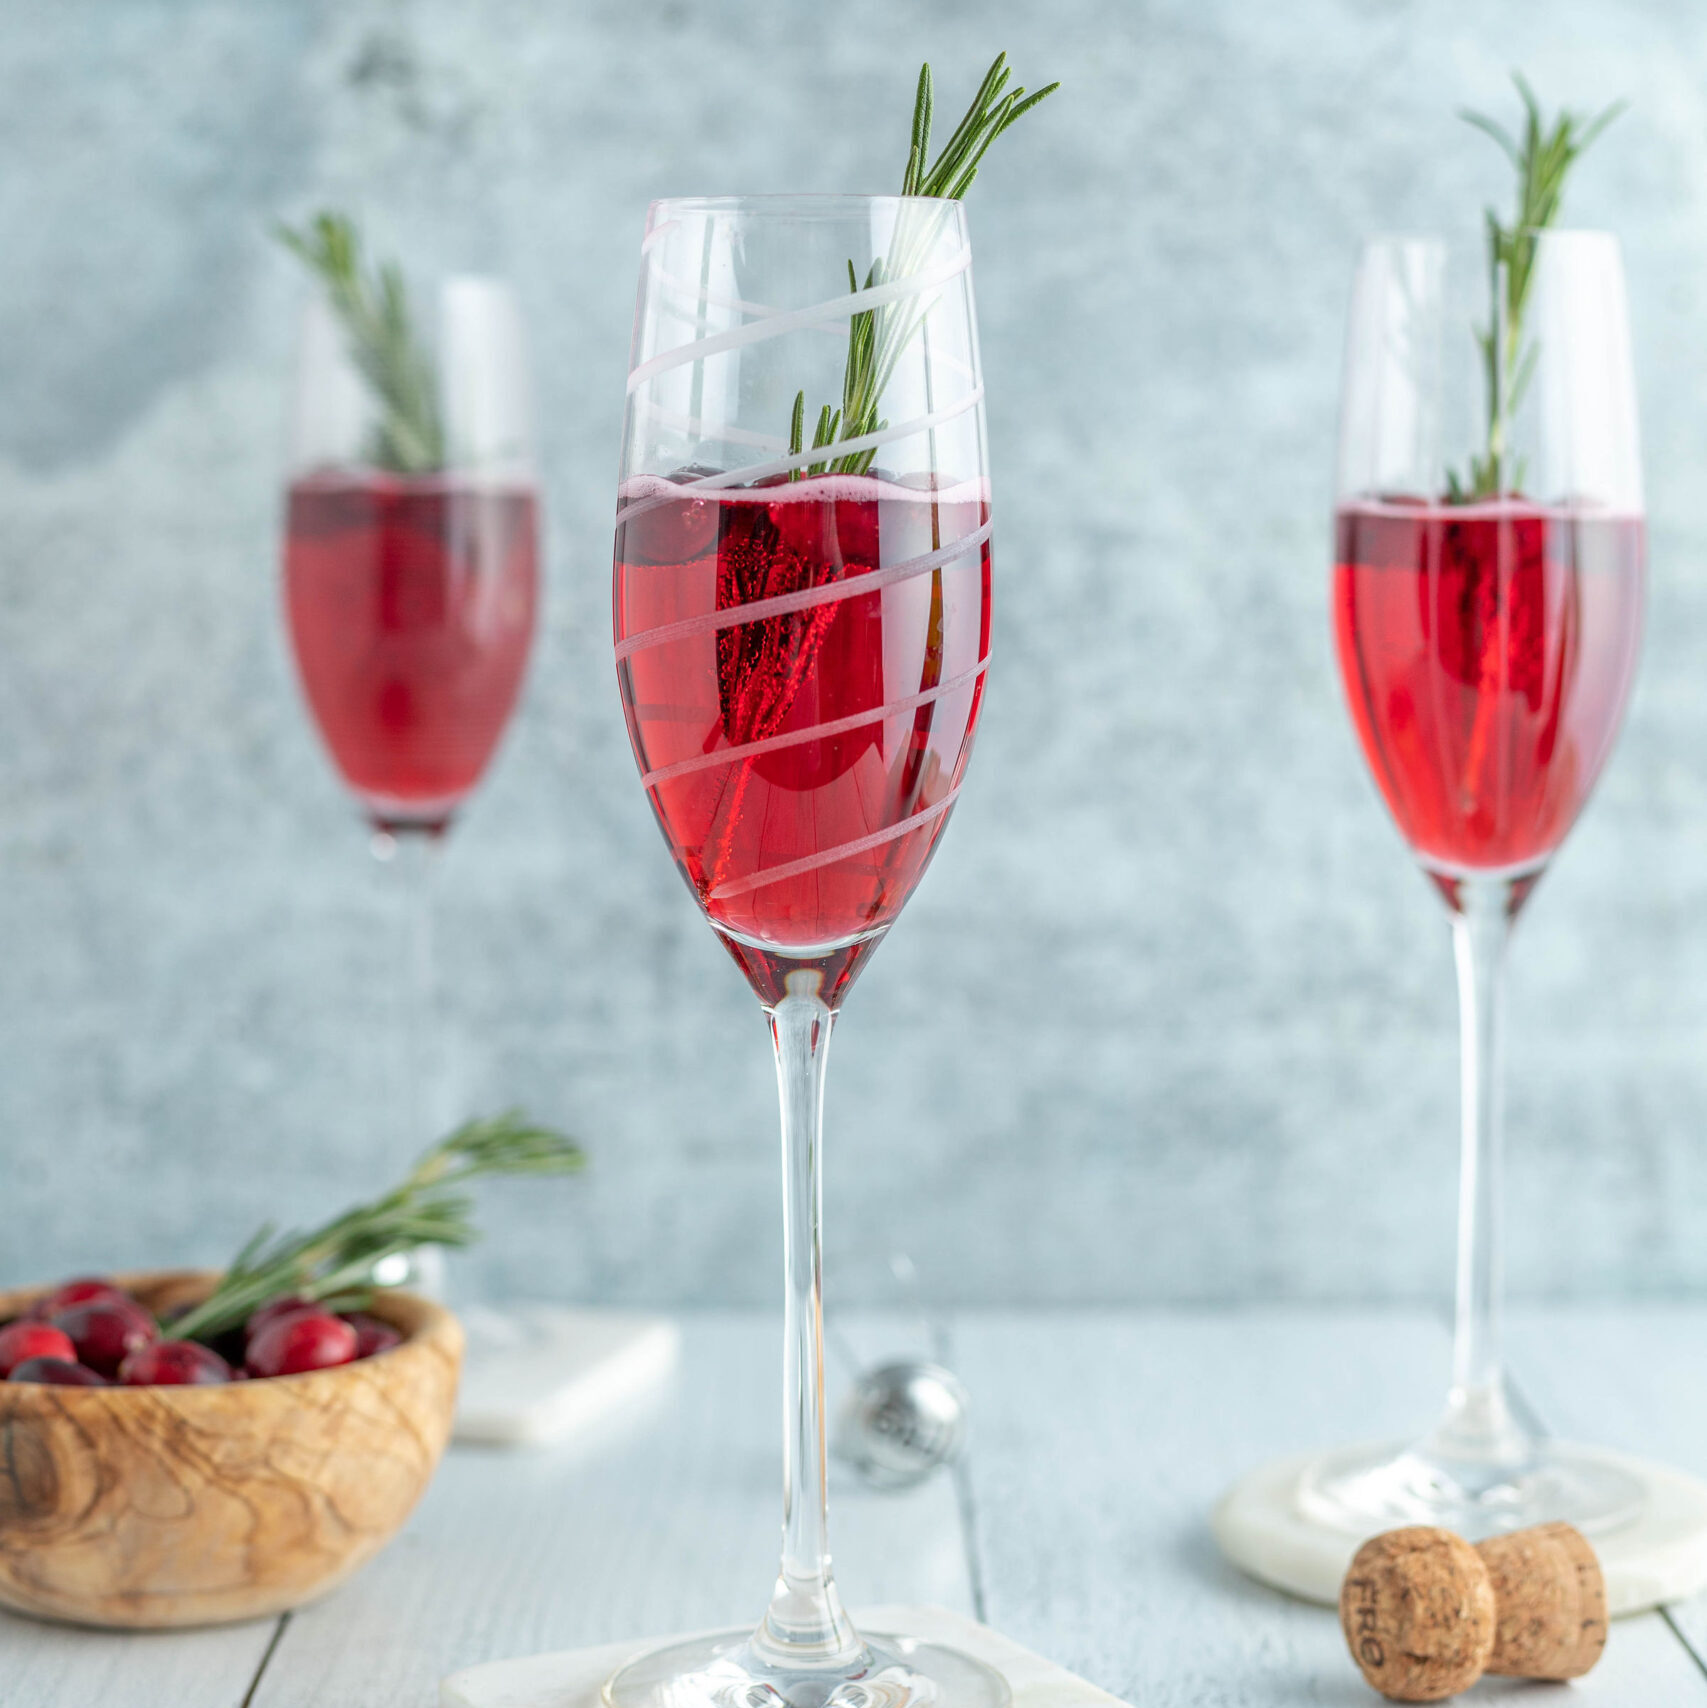 mocktail, mocktails, mocktail recipe, fre wines, non alcoholic cocktails, non alcoholic drinks